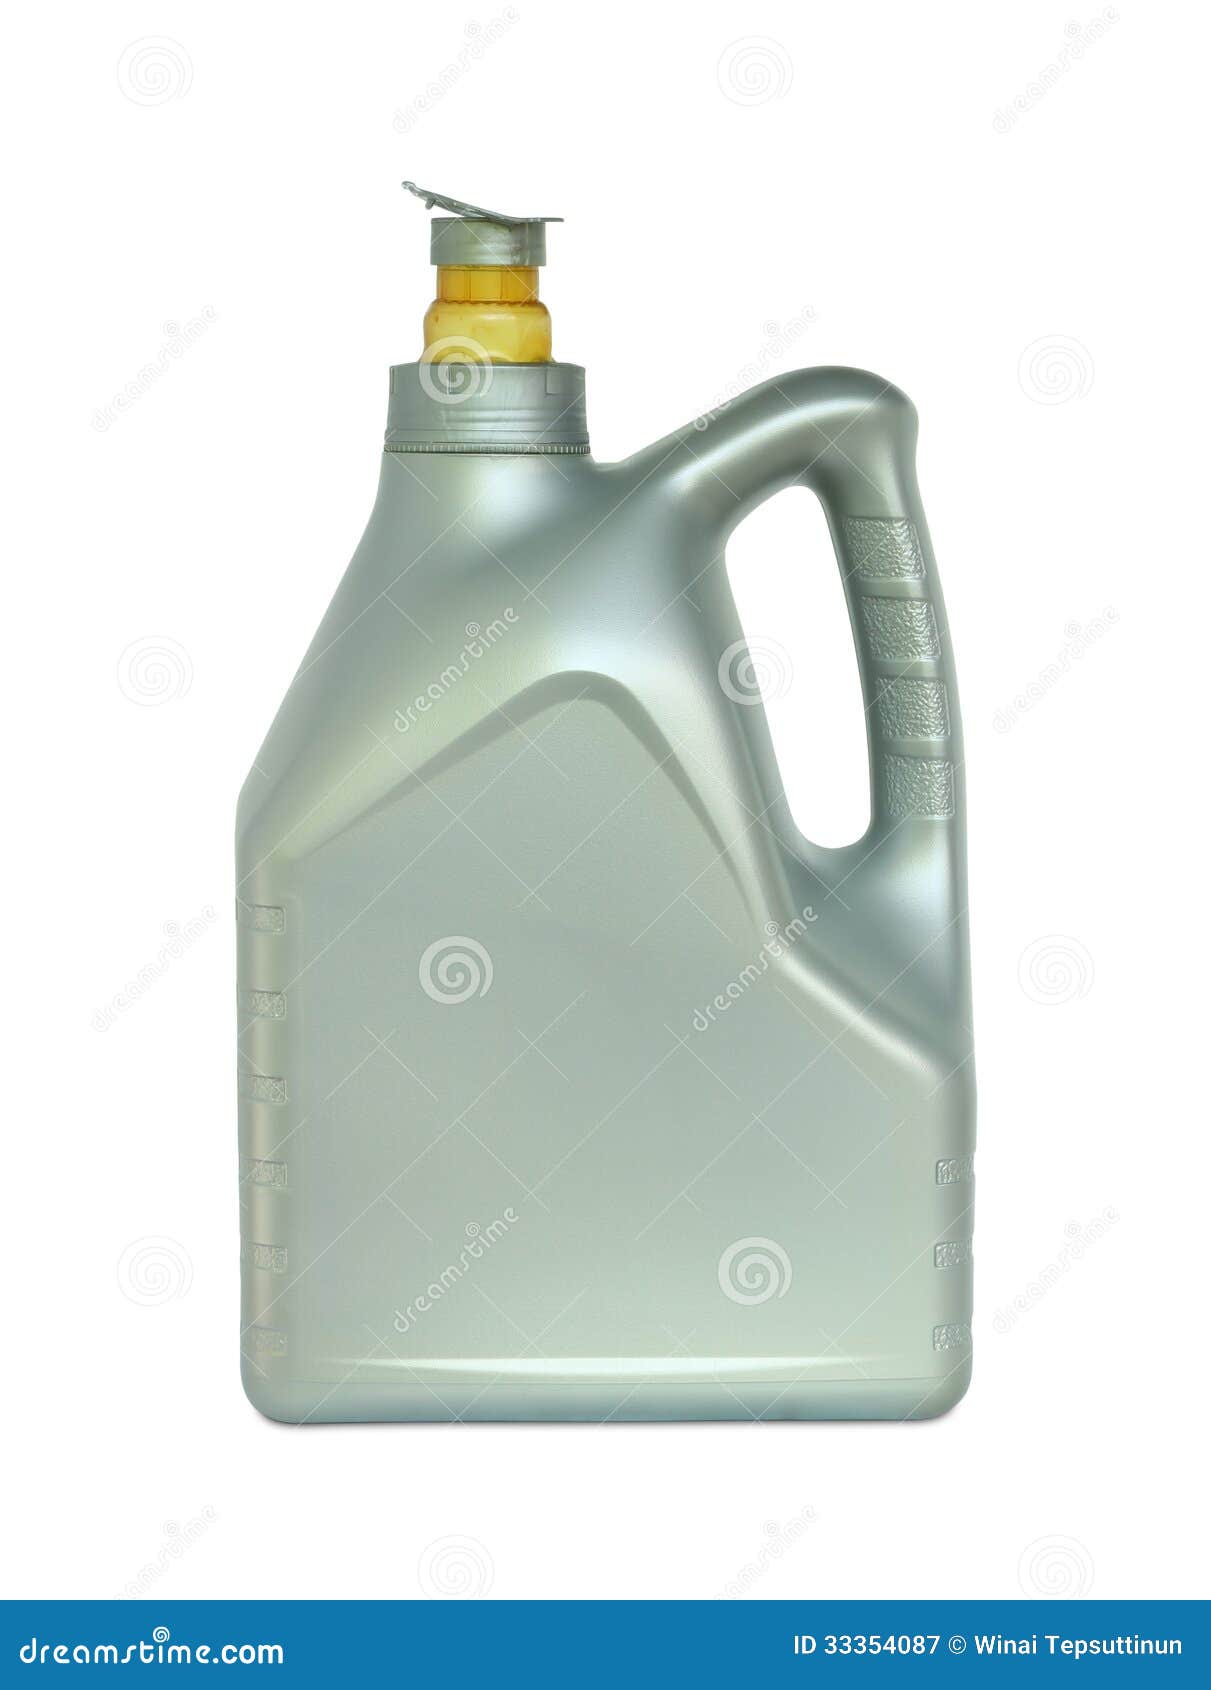 Oil can stock image. Image of plastic, tank, pail, isolated - 33354087